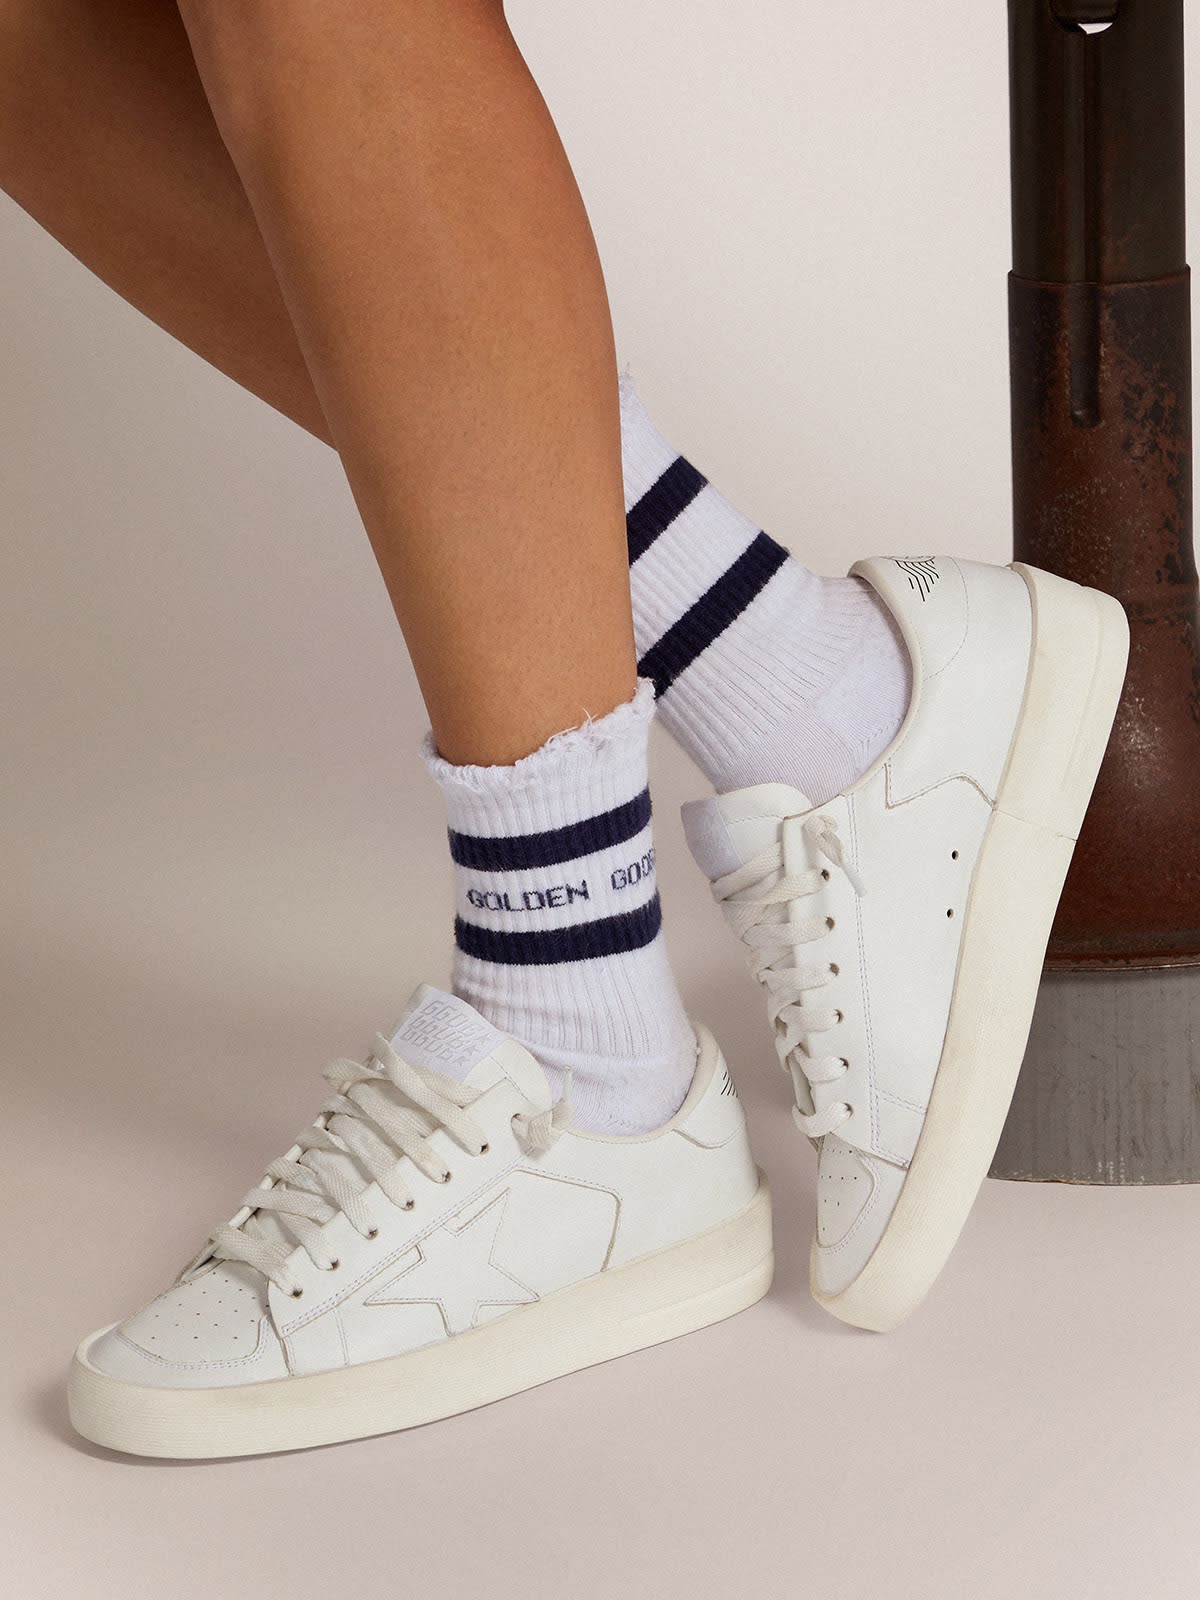 Golden Goose - Cotton socks with distressed finishes, blue stripes and logo in 